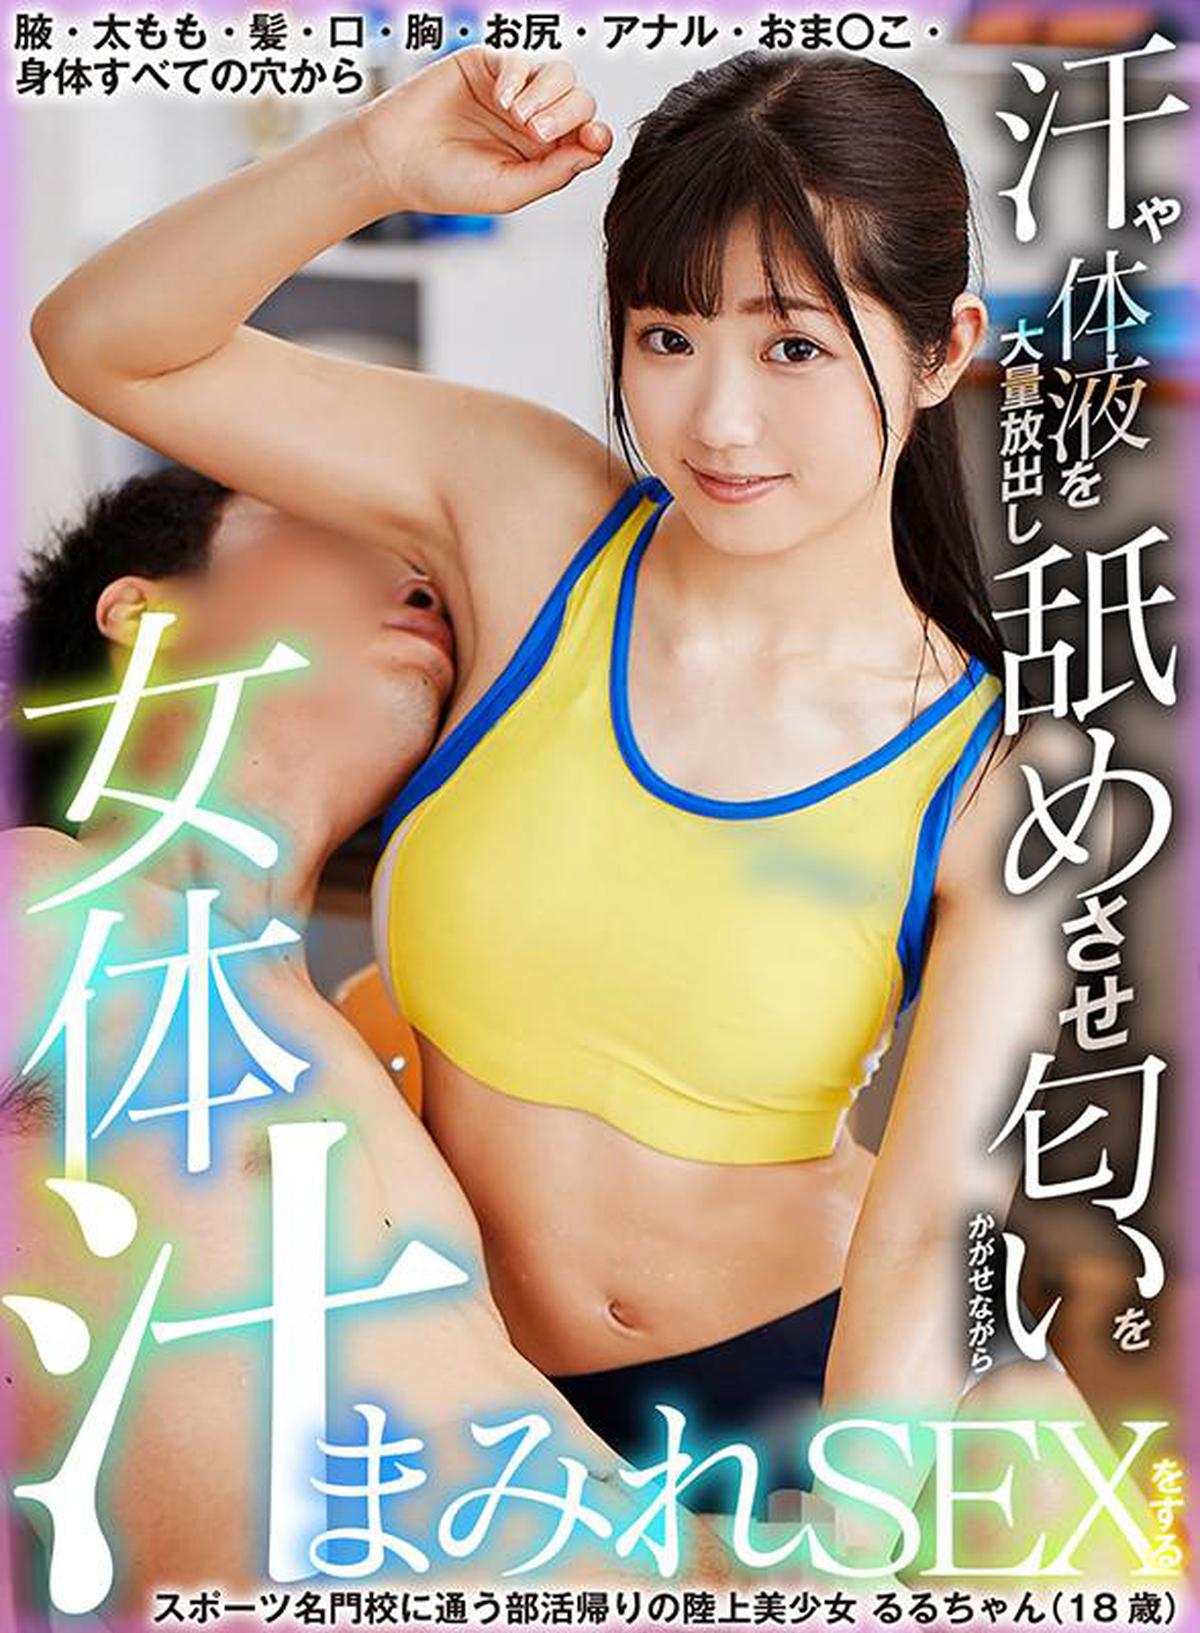 6000Kbps FHD geki-052 Armpits, thighs, hair, mouth, chest, buttocks, anal, omako, a large amount of sweat and body fluids are released from all holes in the body, licked and covered with female body juice while smelling Ruru-chan (18 years old), a land-based beautiful girl on the way home from club activities attending a prestigious sports school